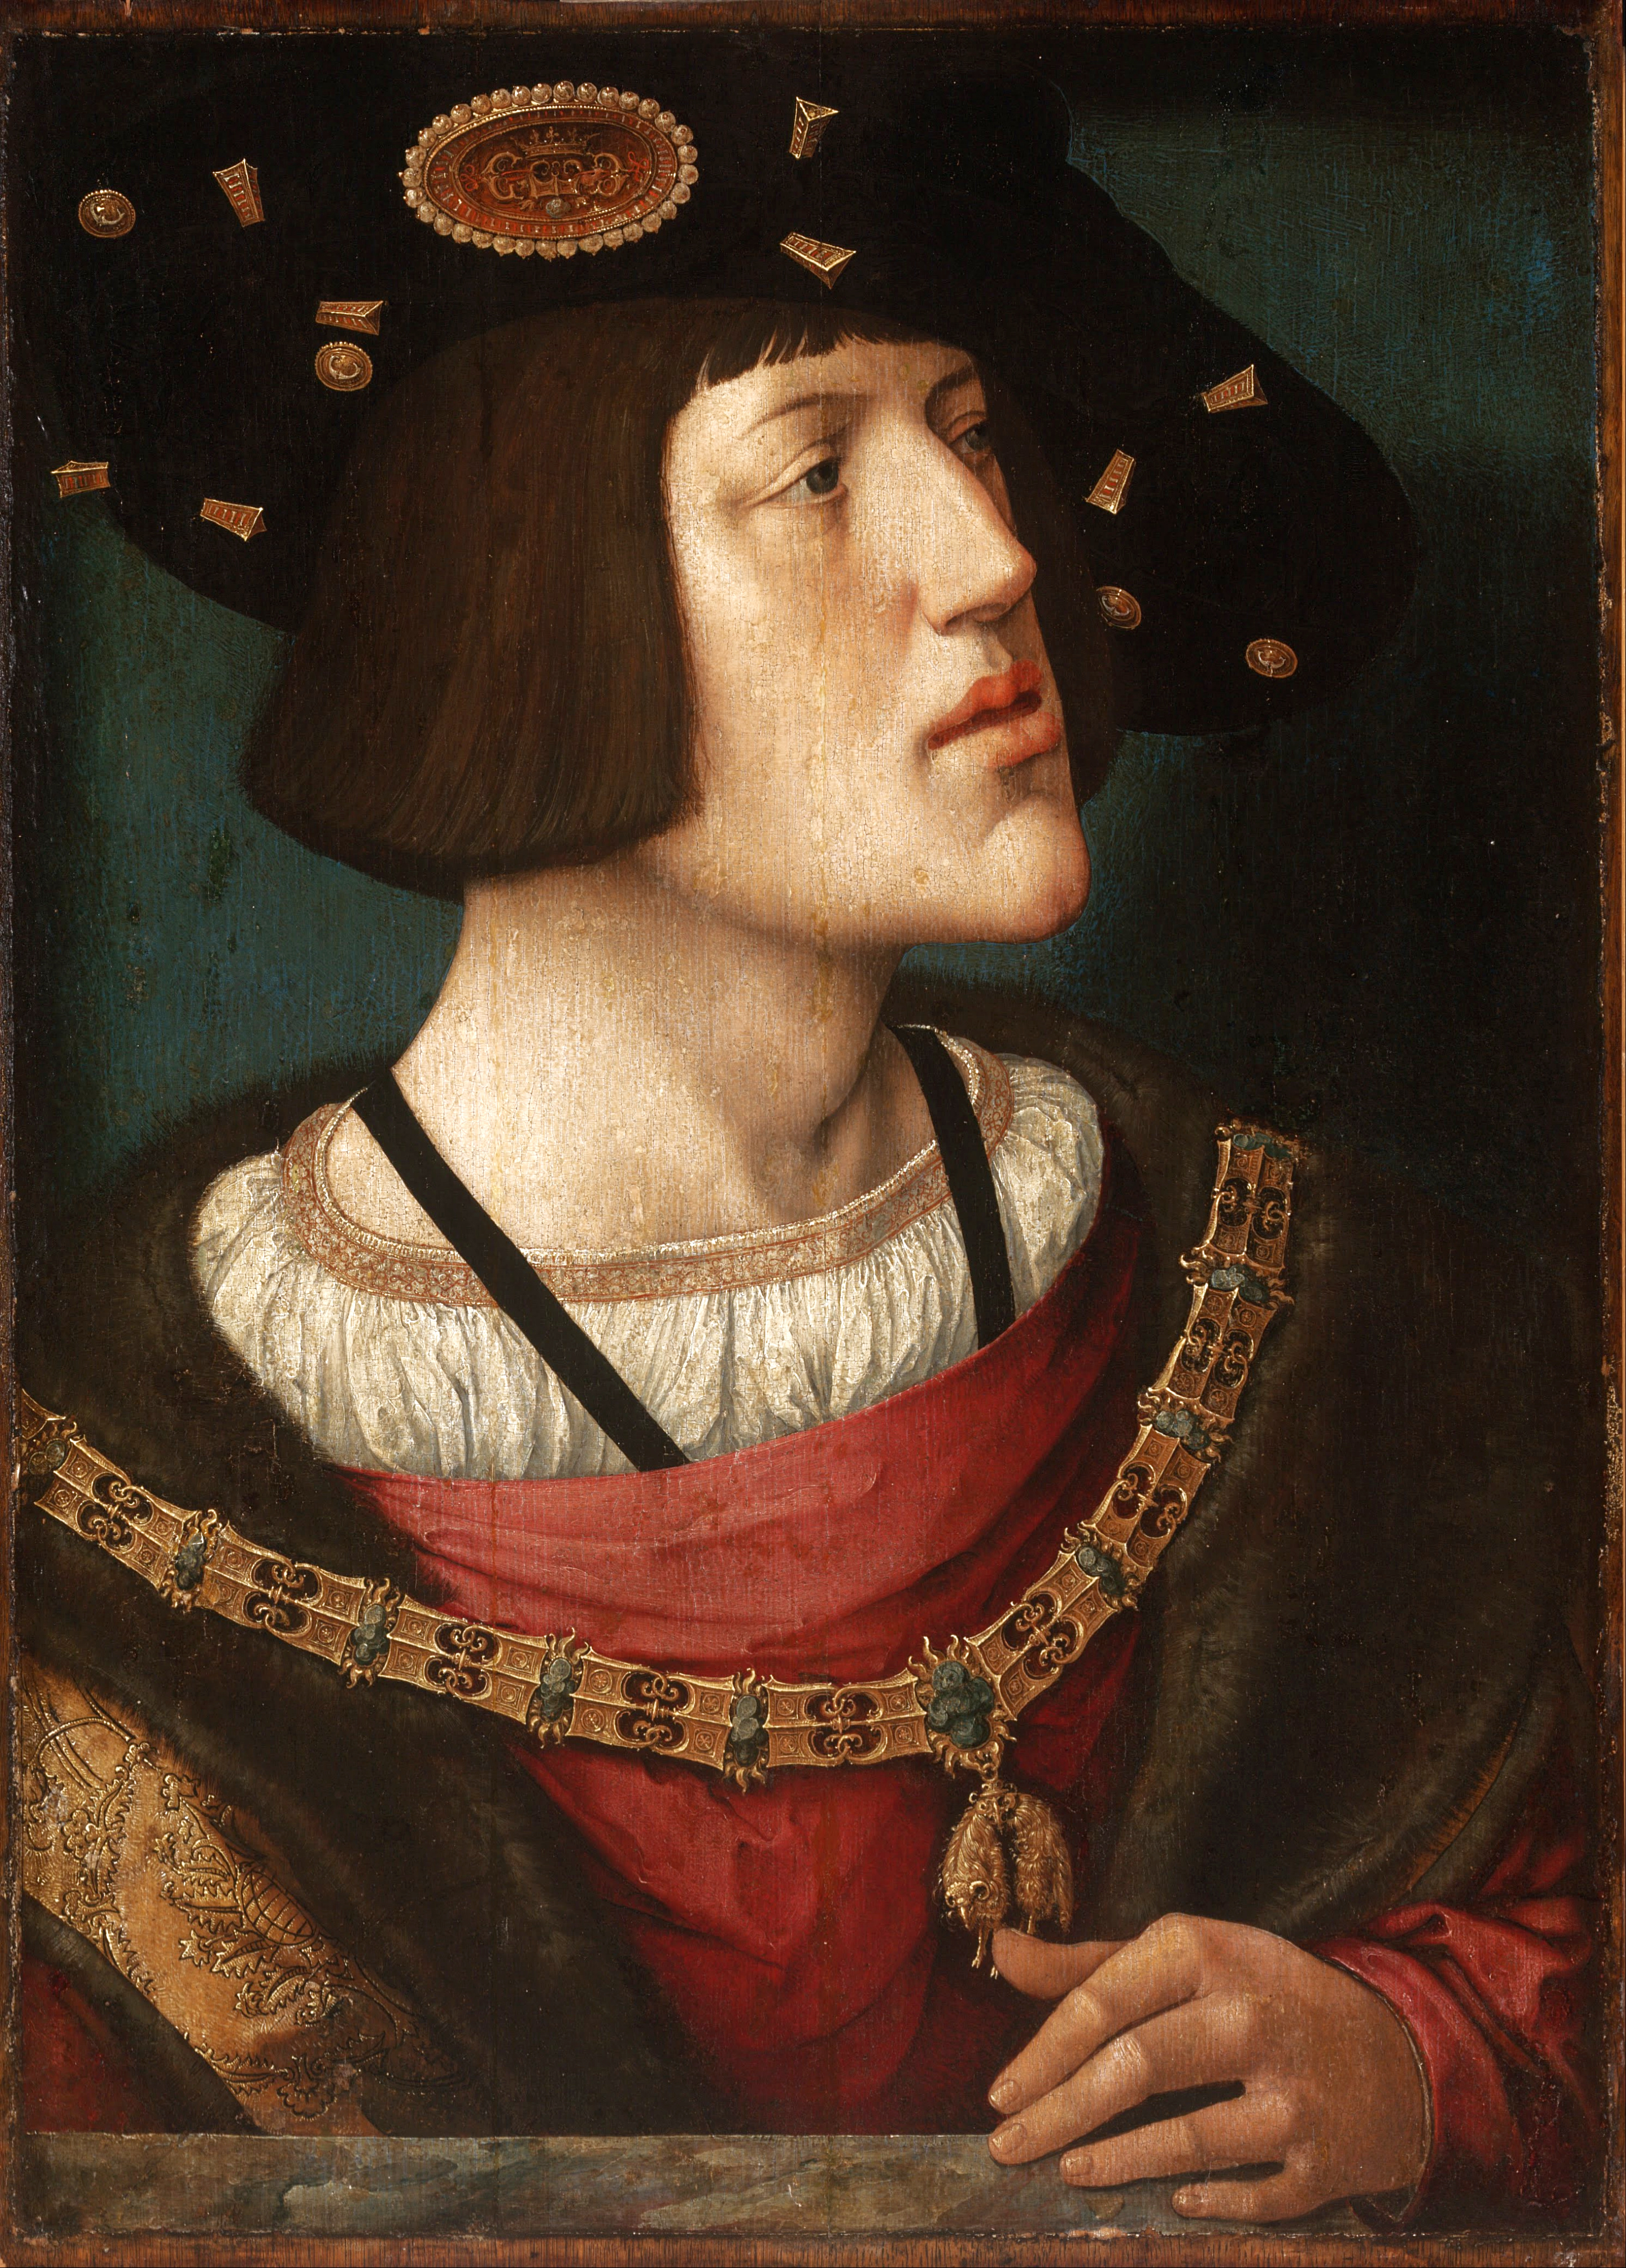 Charles V, Holy Roman Emperor and rival of Henry VIII